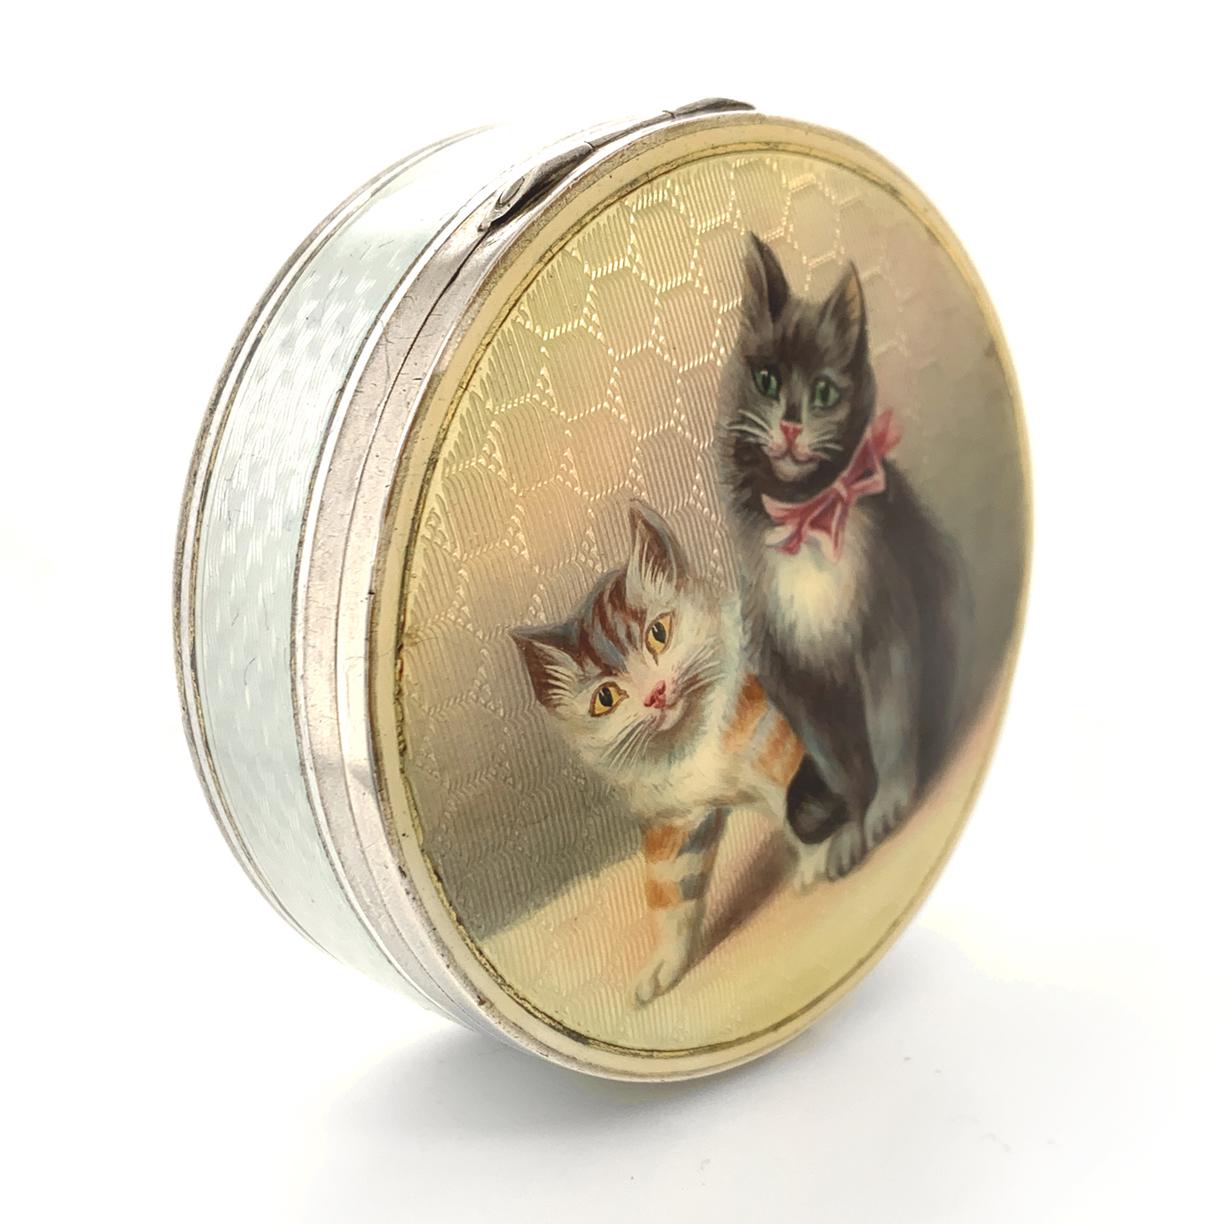 Most endearing kitten case:  a round  sterling silver hinged box with two adorable enameled kittens.  One is black and white with a big pink bow and the other has orange and white stripes. The top of the case is guilloche enamel, with a golden